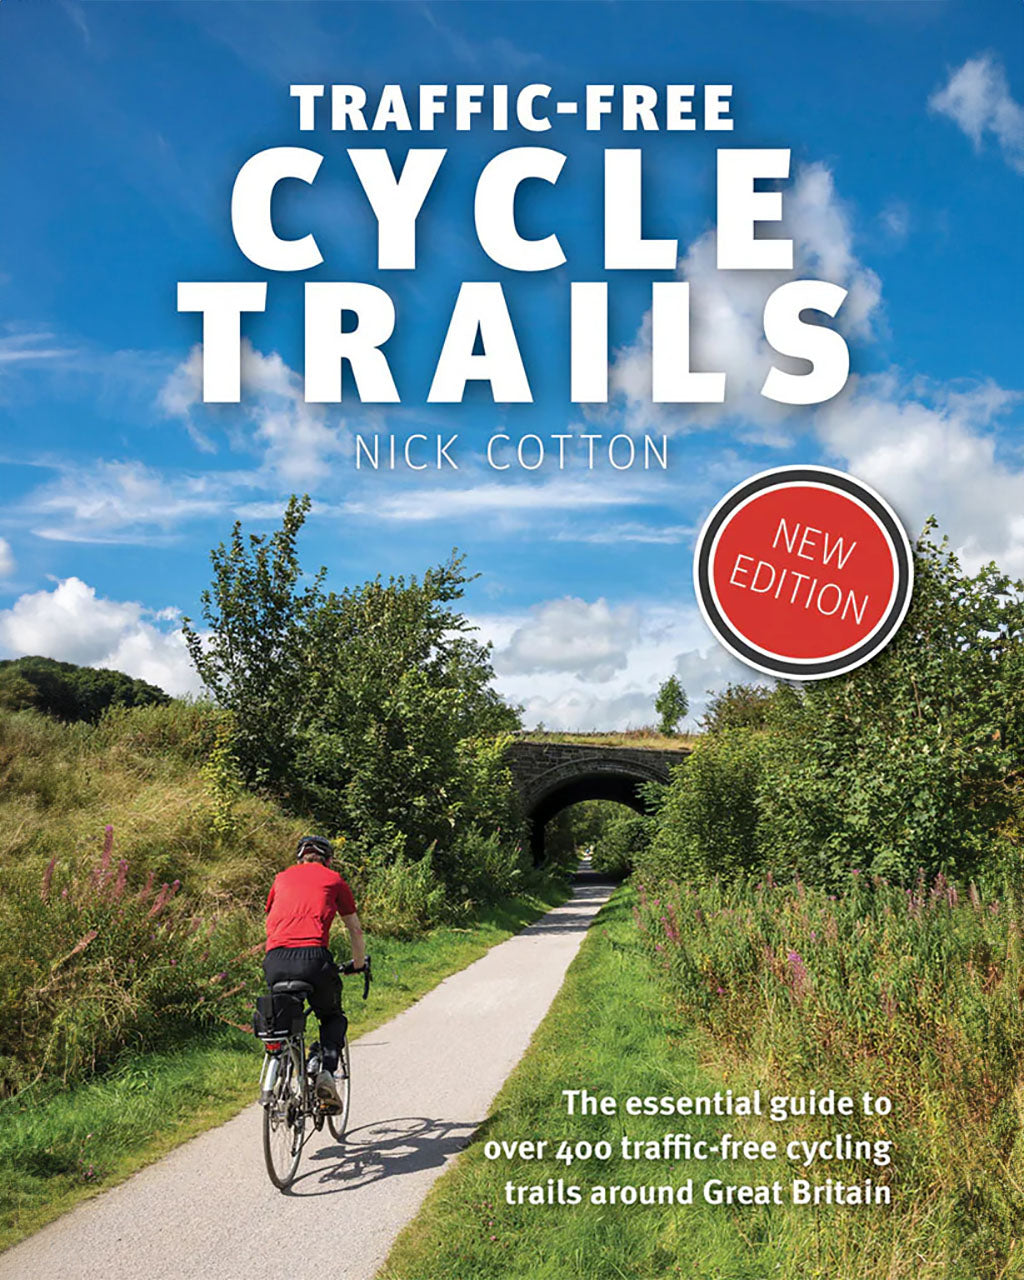 Traffic Free Cycle Trails by Nick Cotton